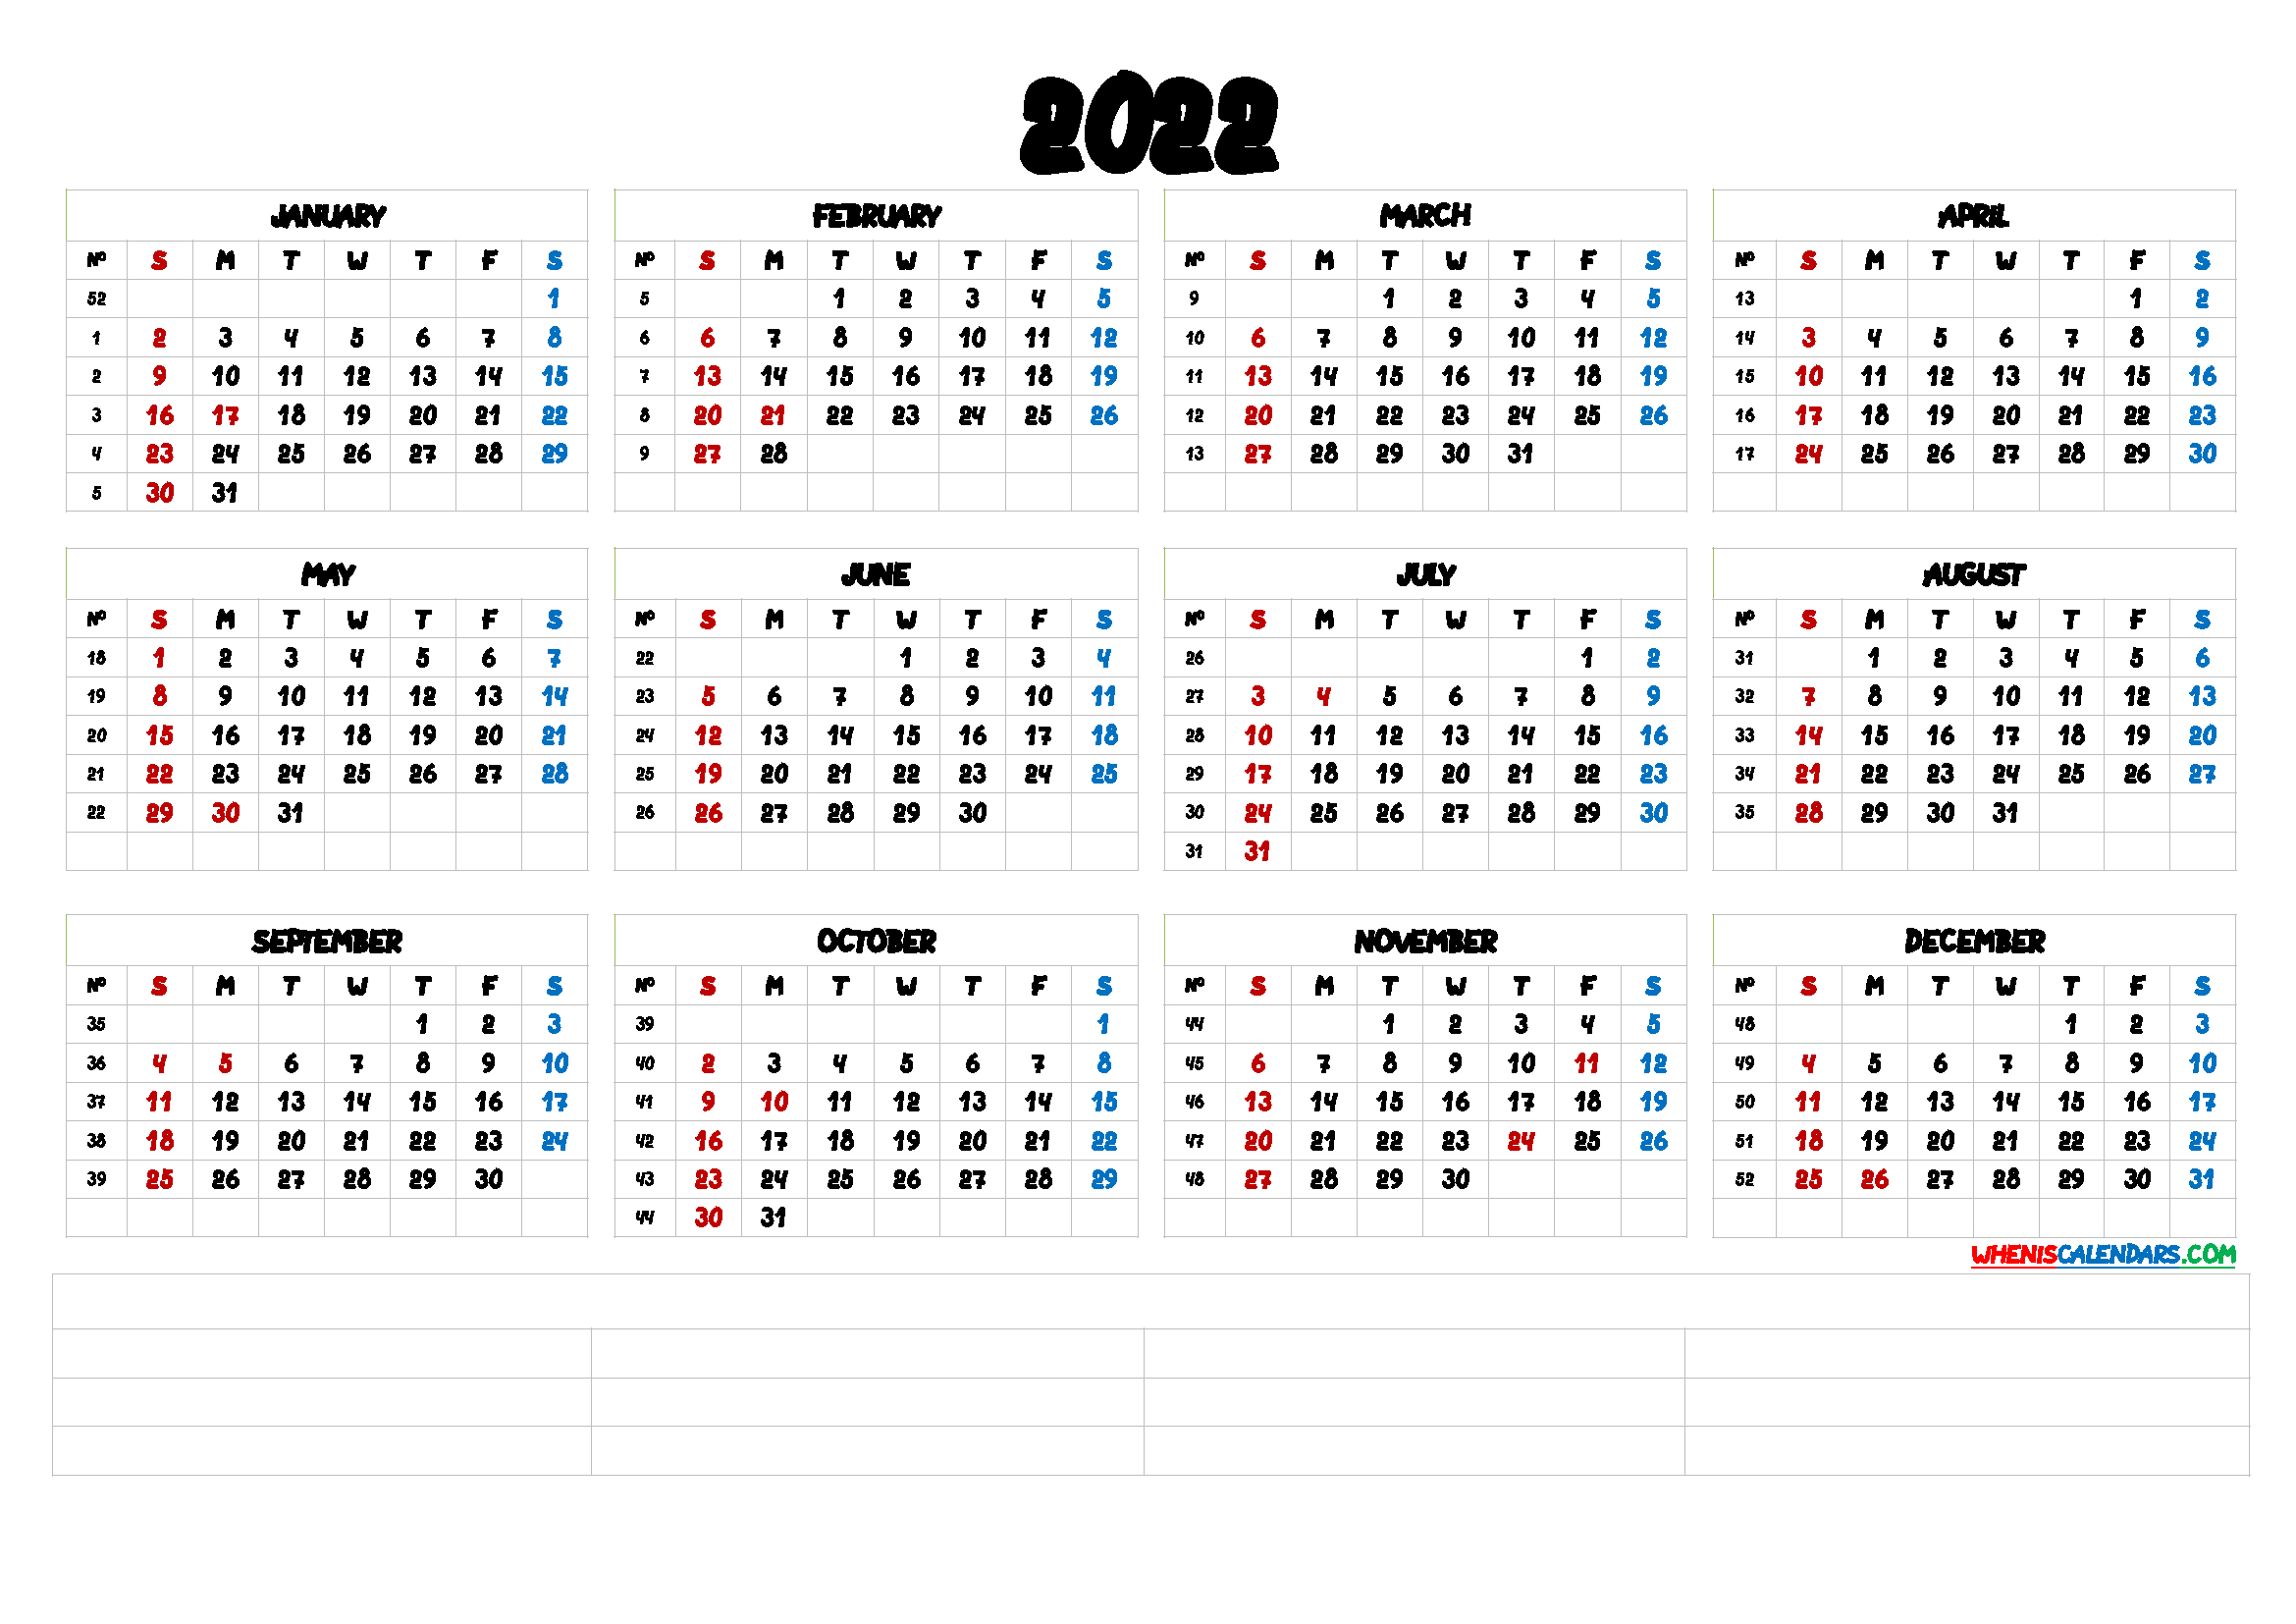 Calendar 2022 With Week Numbers | Free Letter Templates pertaining to 2022 Calendar With Weeks